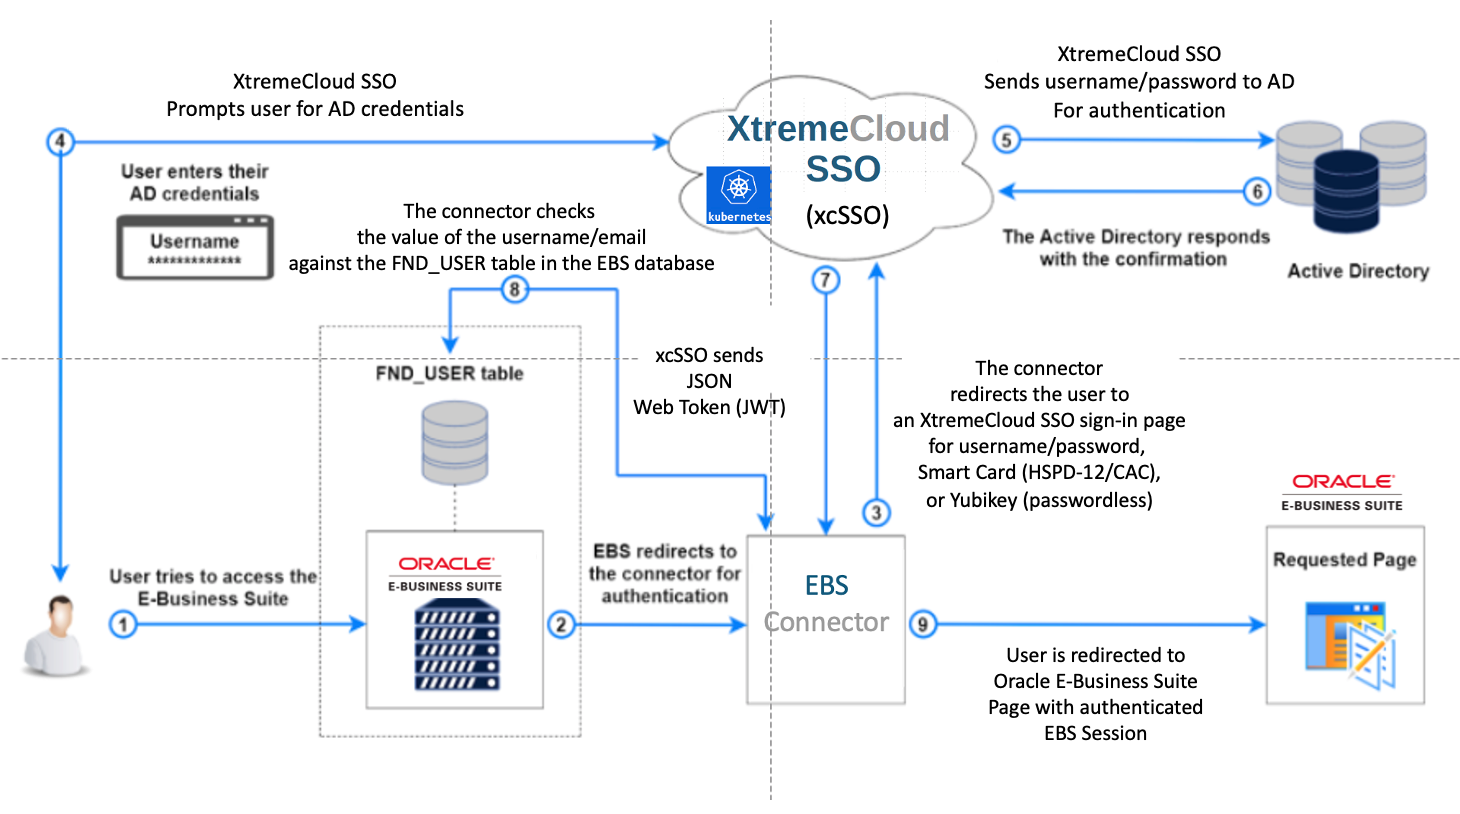 XtremeCloud SSO EBS Connector for Oracle E-Business Suite